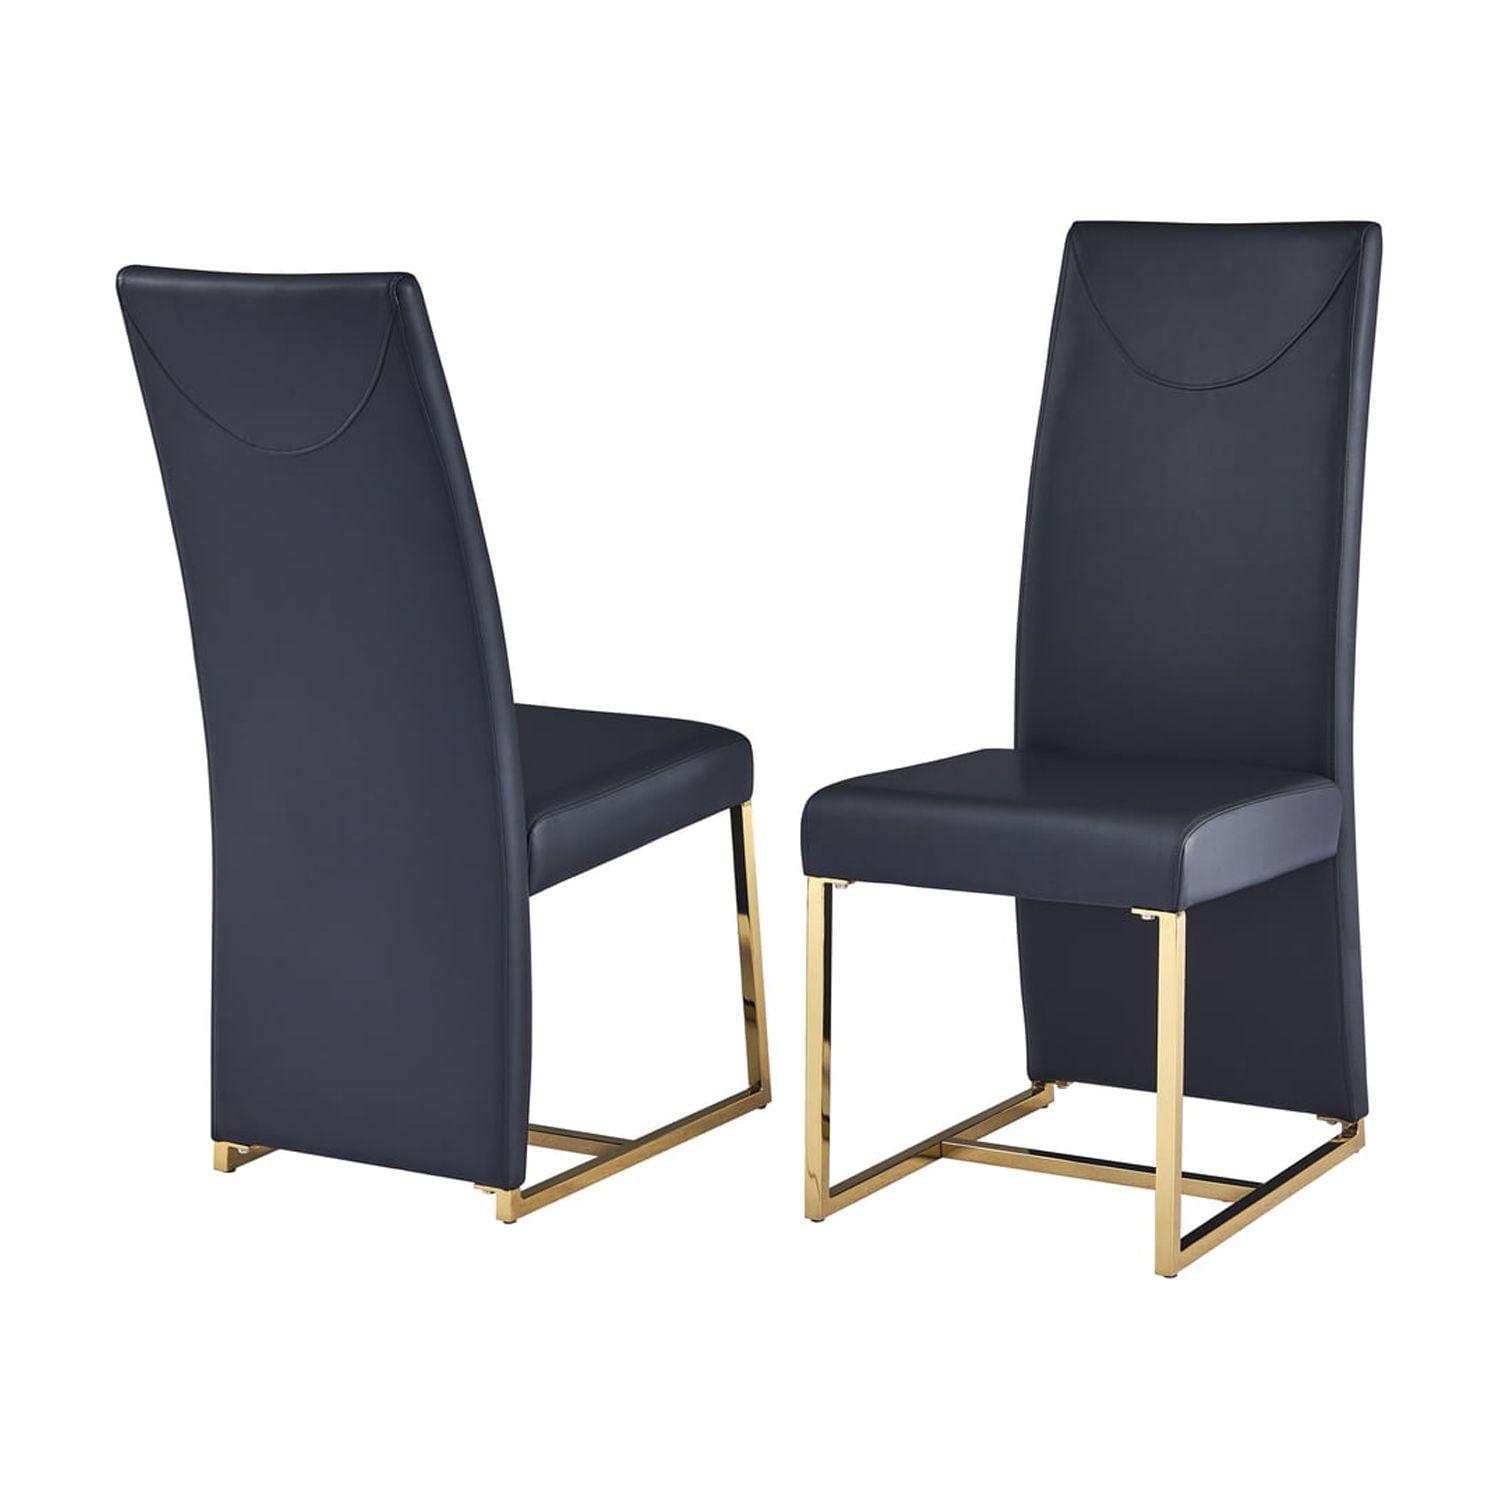 Parsons Black Faux Leather High Back Dining Chairs with Chrome Legs